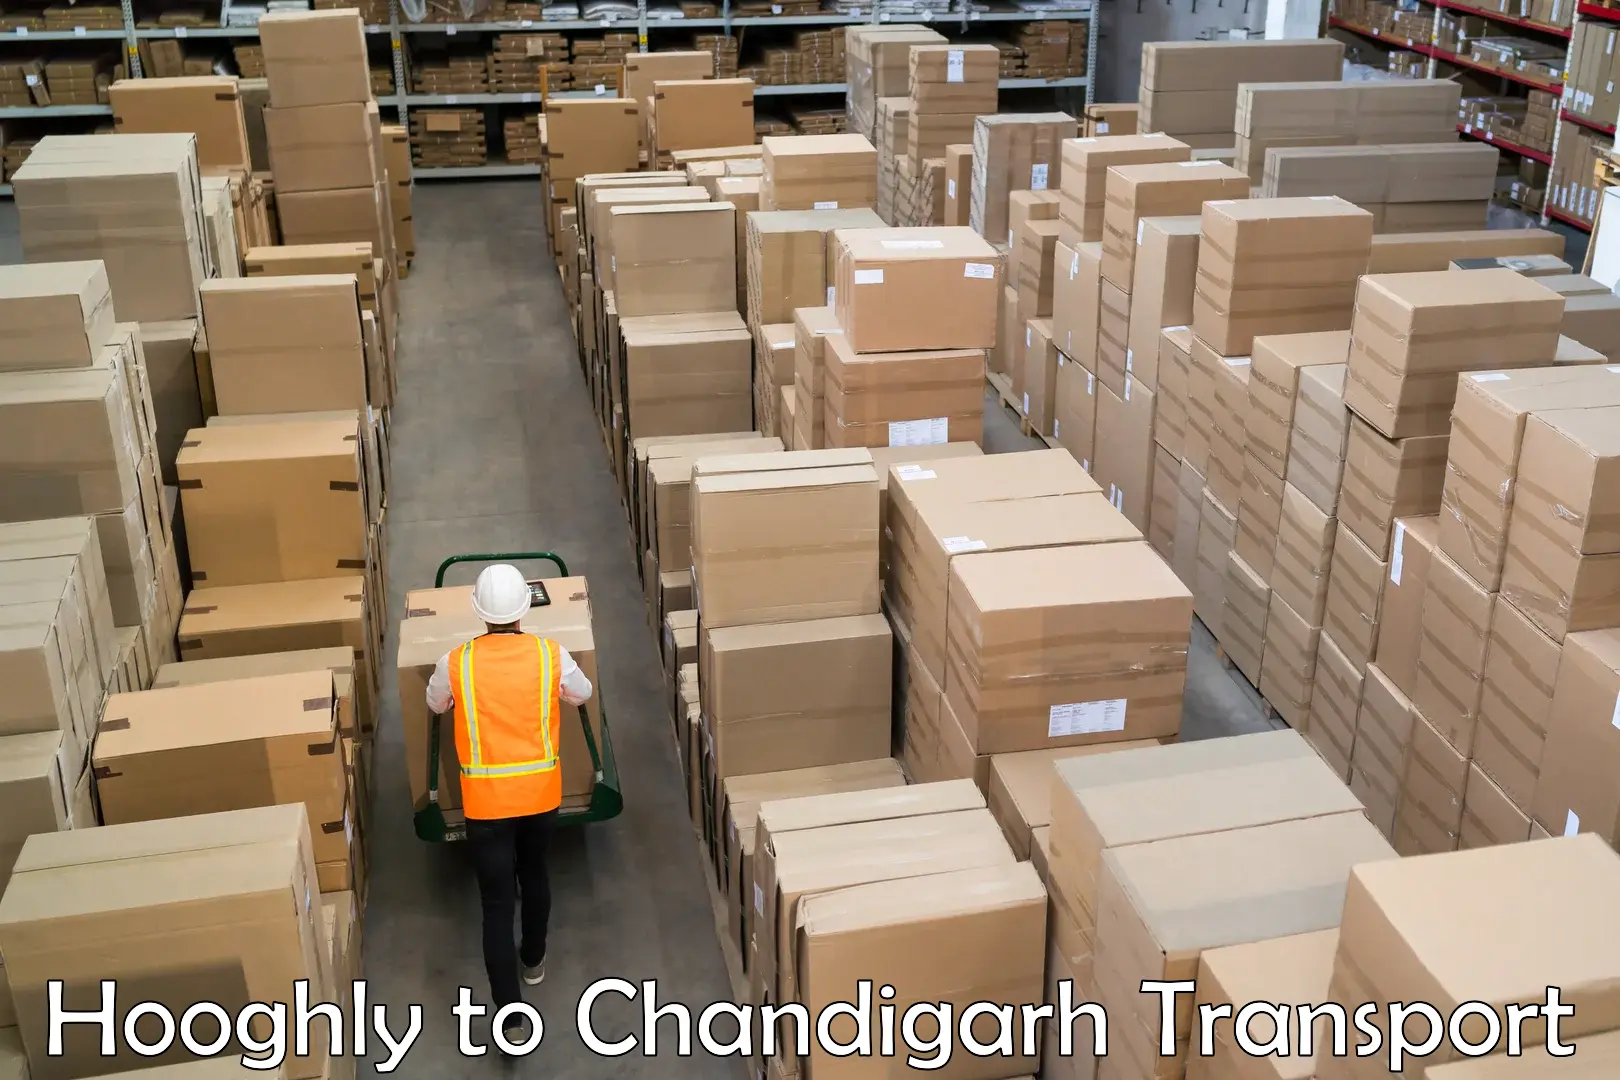 All India transport service Hooghly to Chandigarh